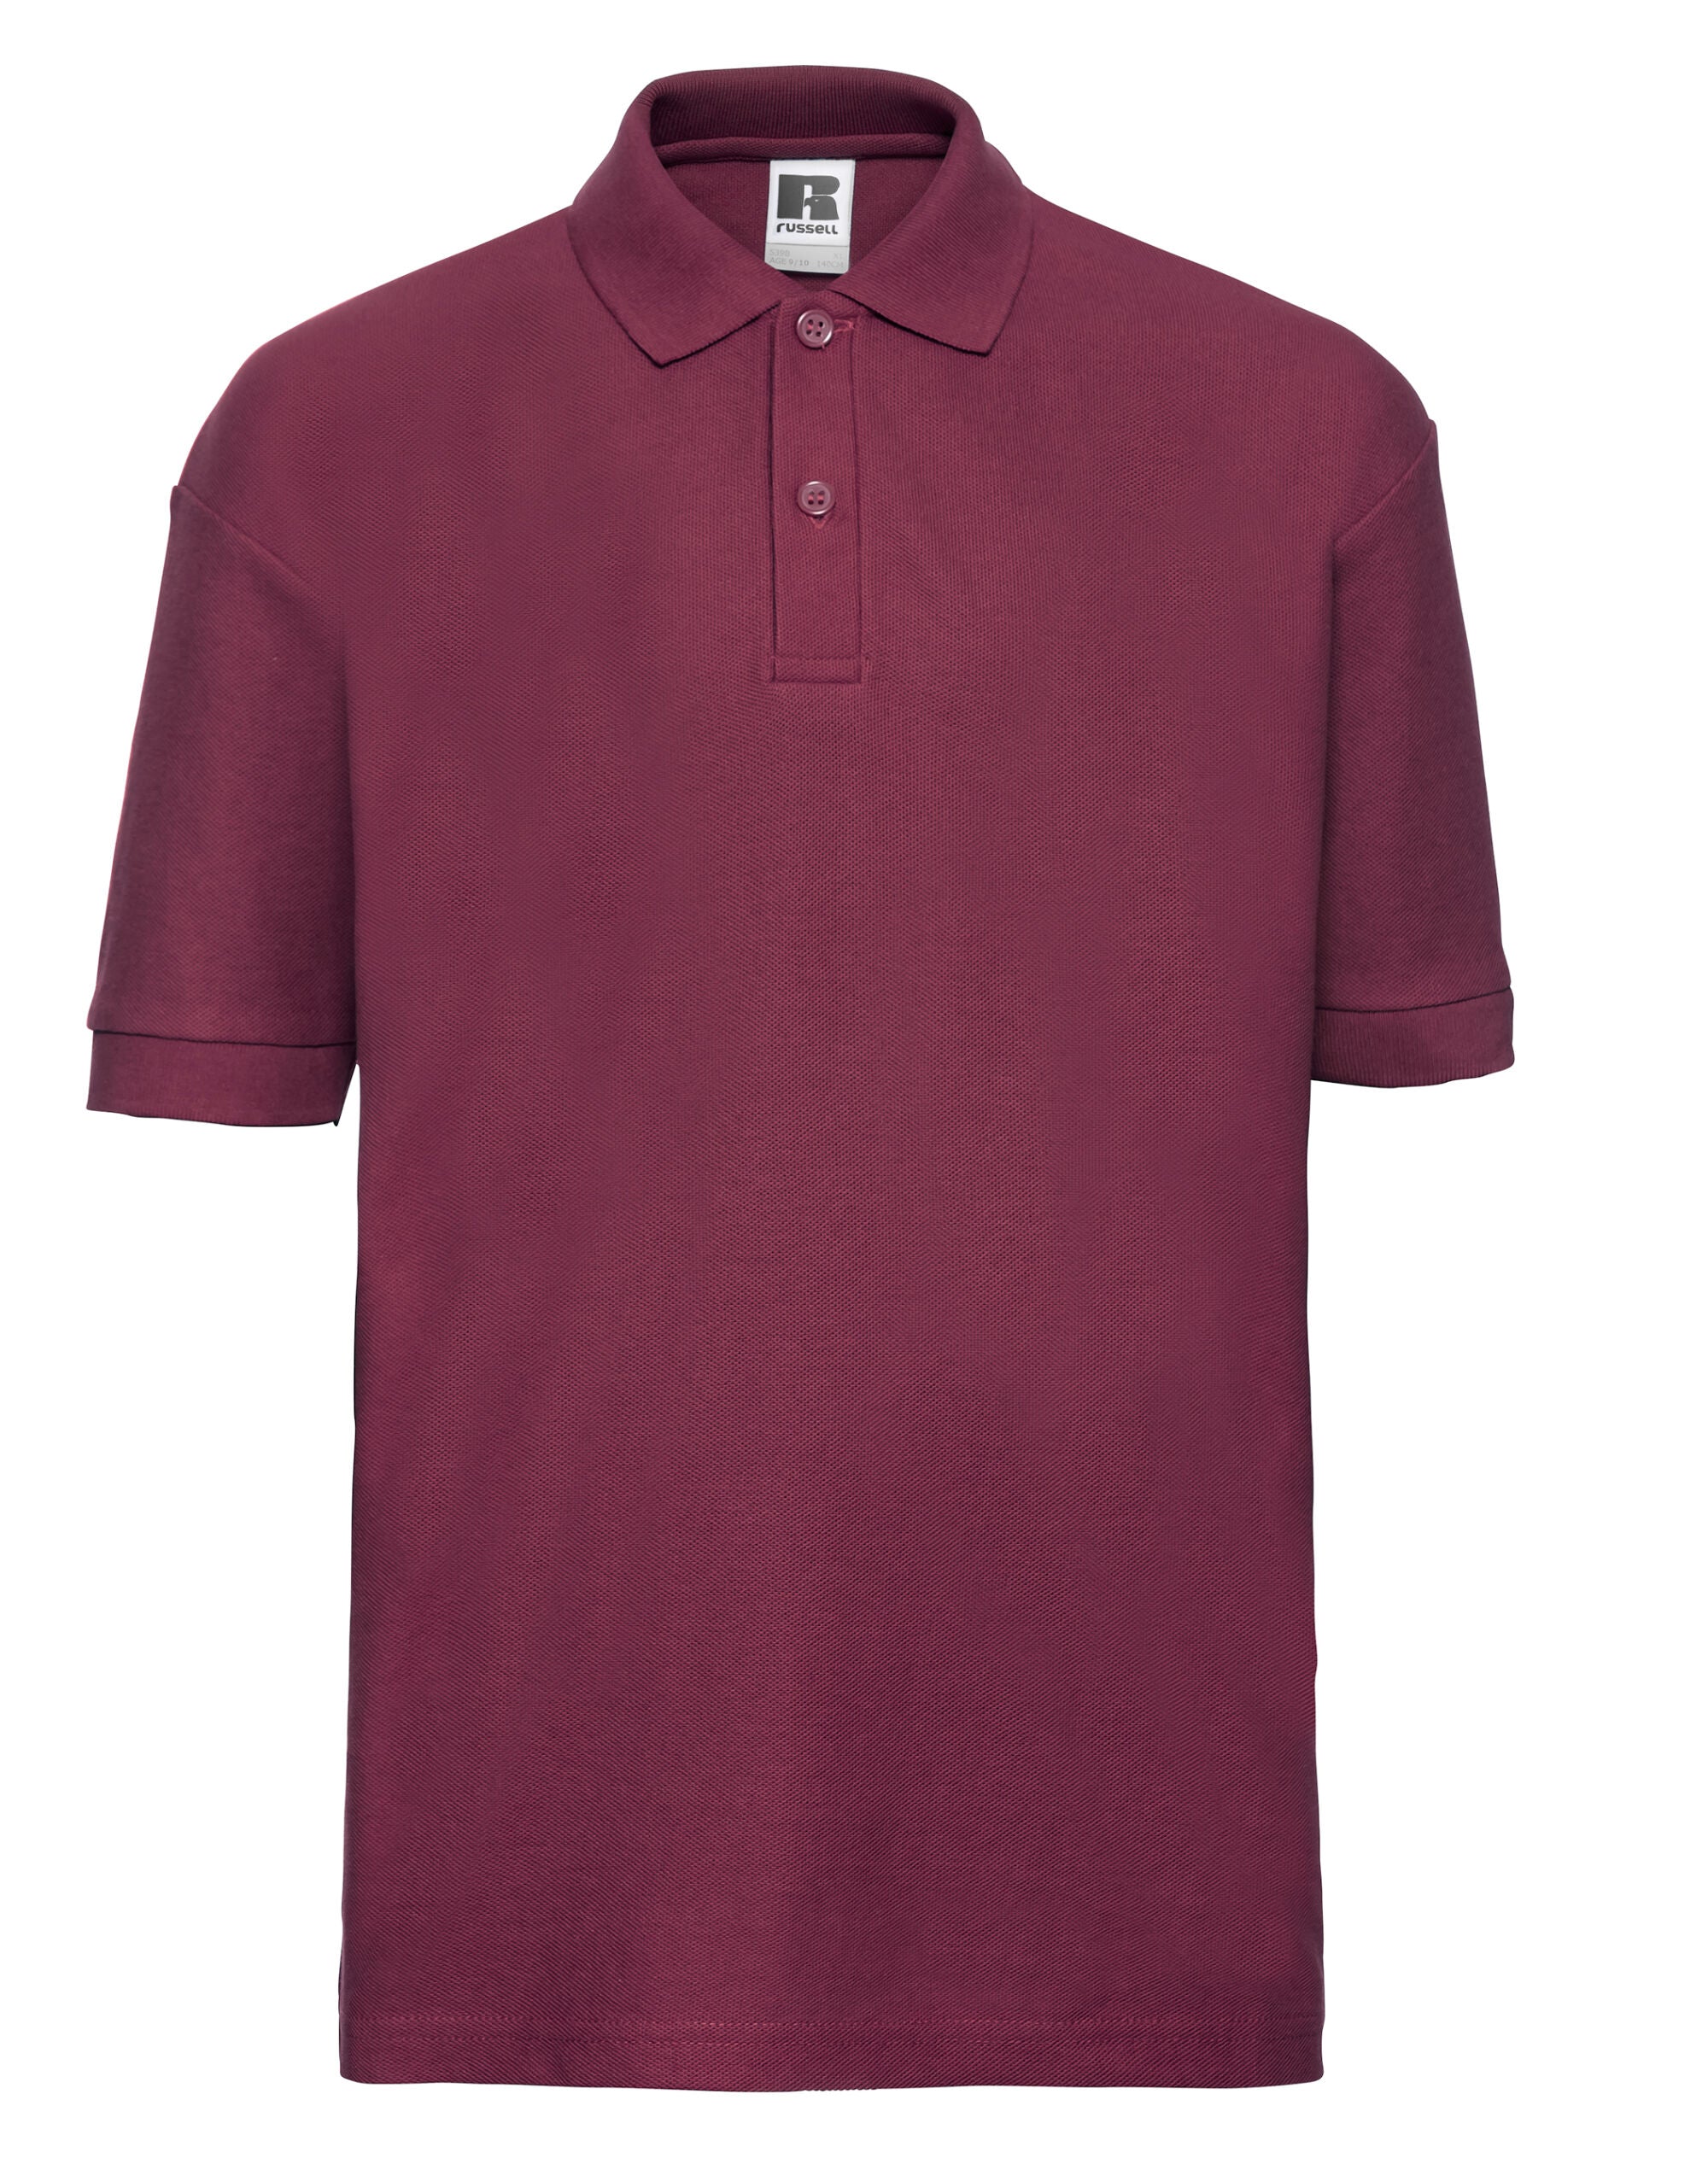 Russell Jerzees Schoolgear Children's Classic Polycotton Polo The double yarn construction creates a very durable and hardwearing fibre (539B)